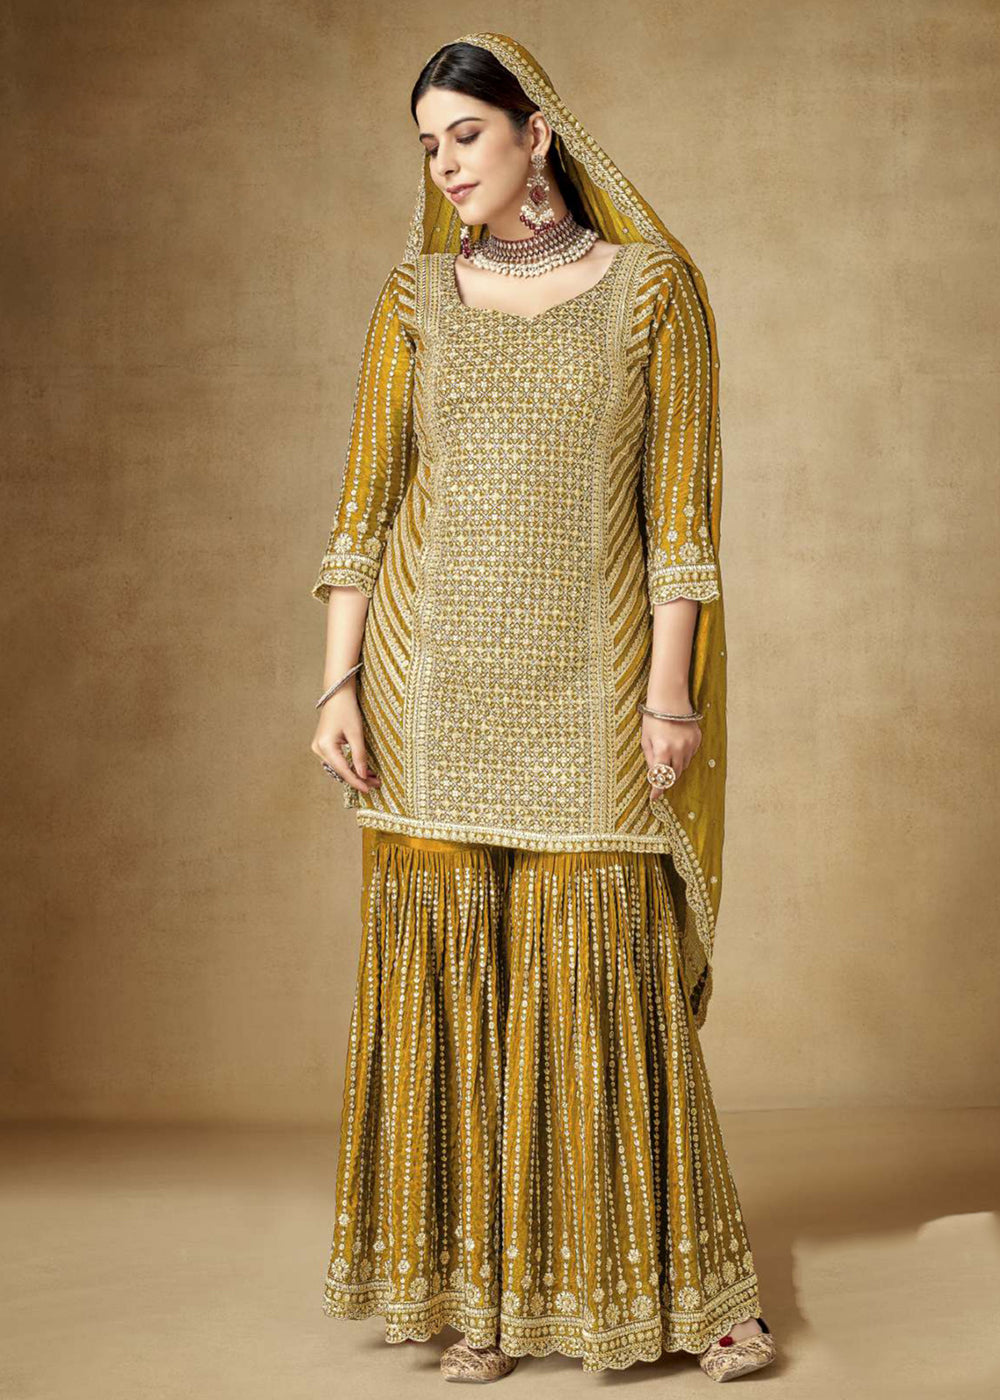 Shop Now Alluring Yellow Zari & Sequins Embroidered Gharara Suit Online at Empress Clothing in USA, UK, Canada, Italy & Worldwide. 